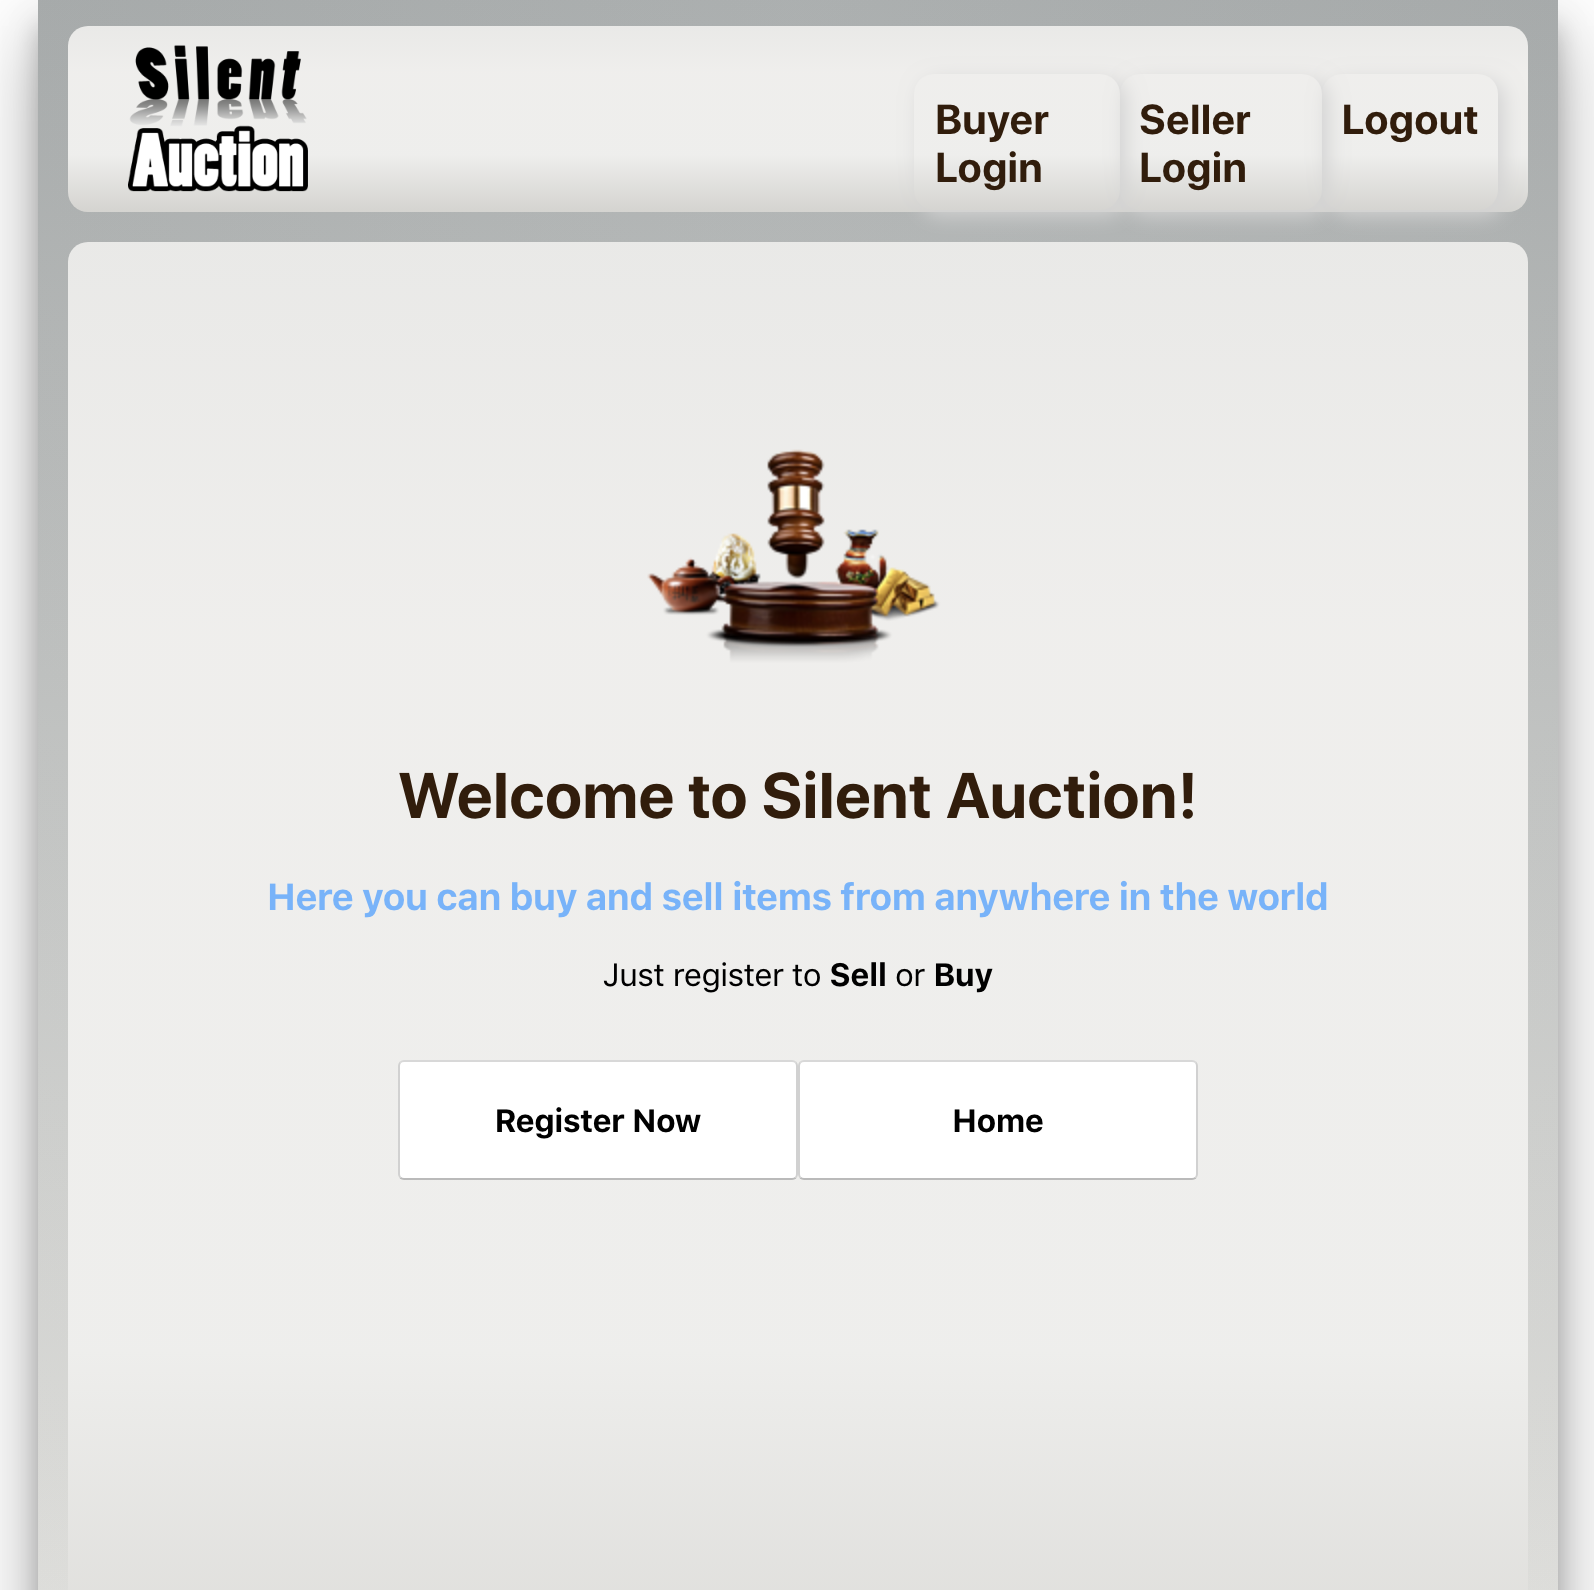 Landing page of a silent auction website